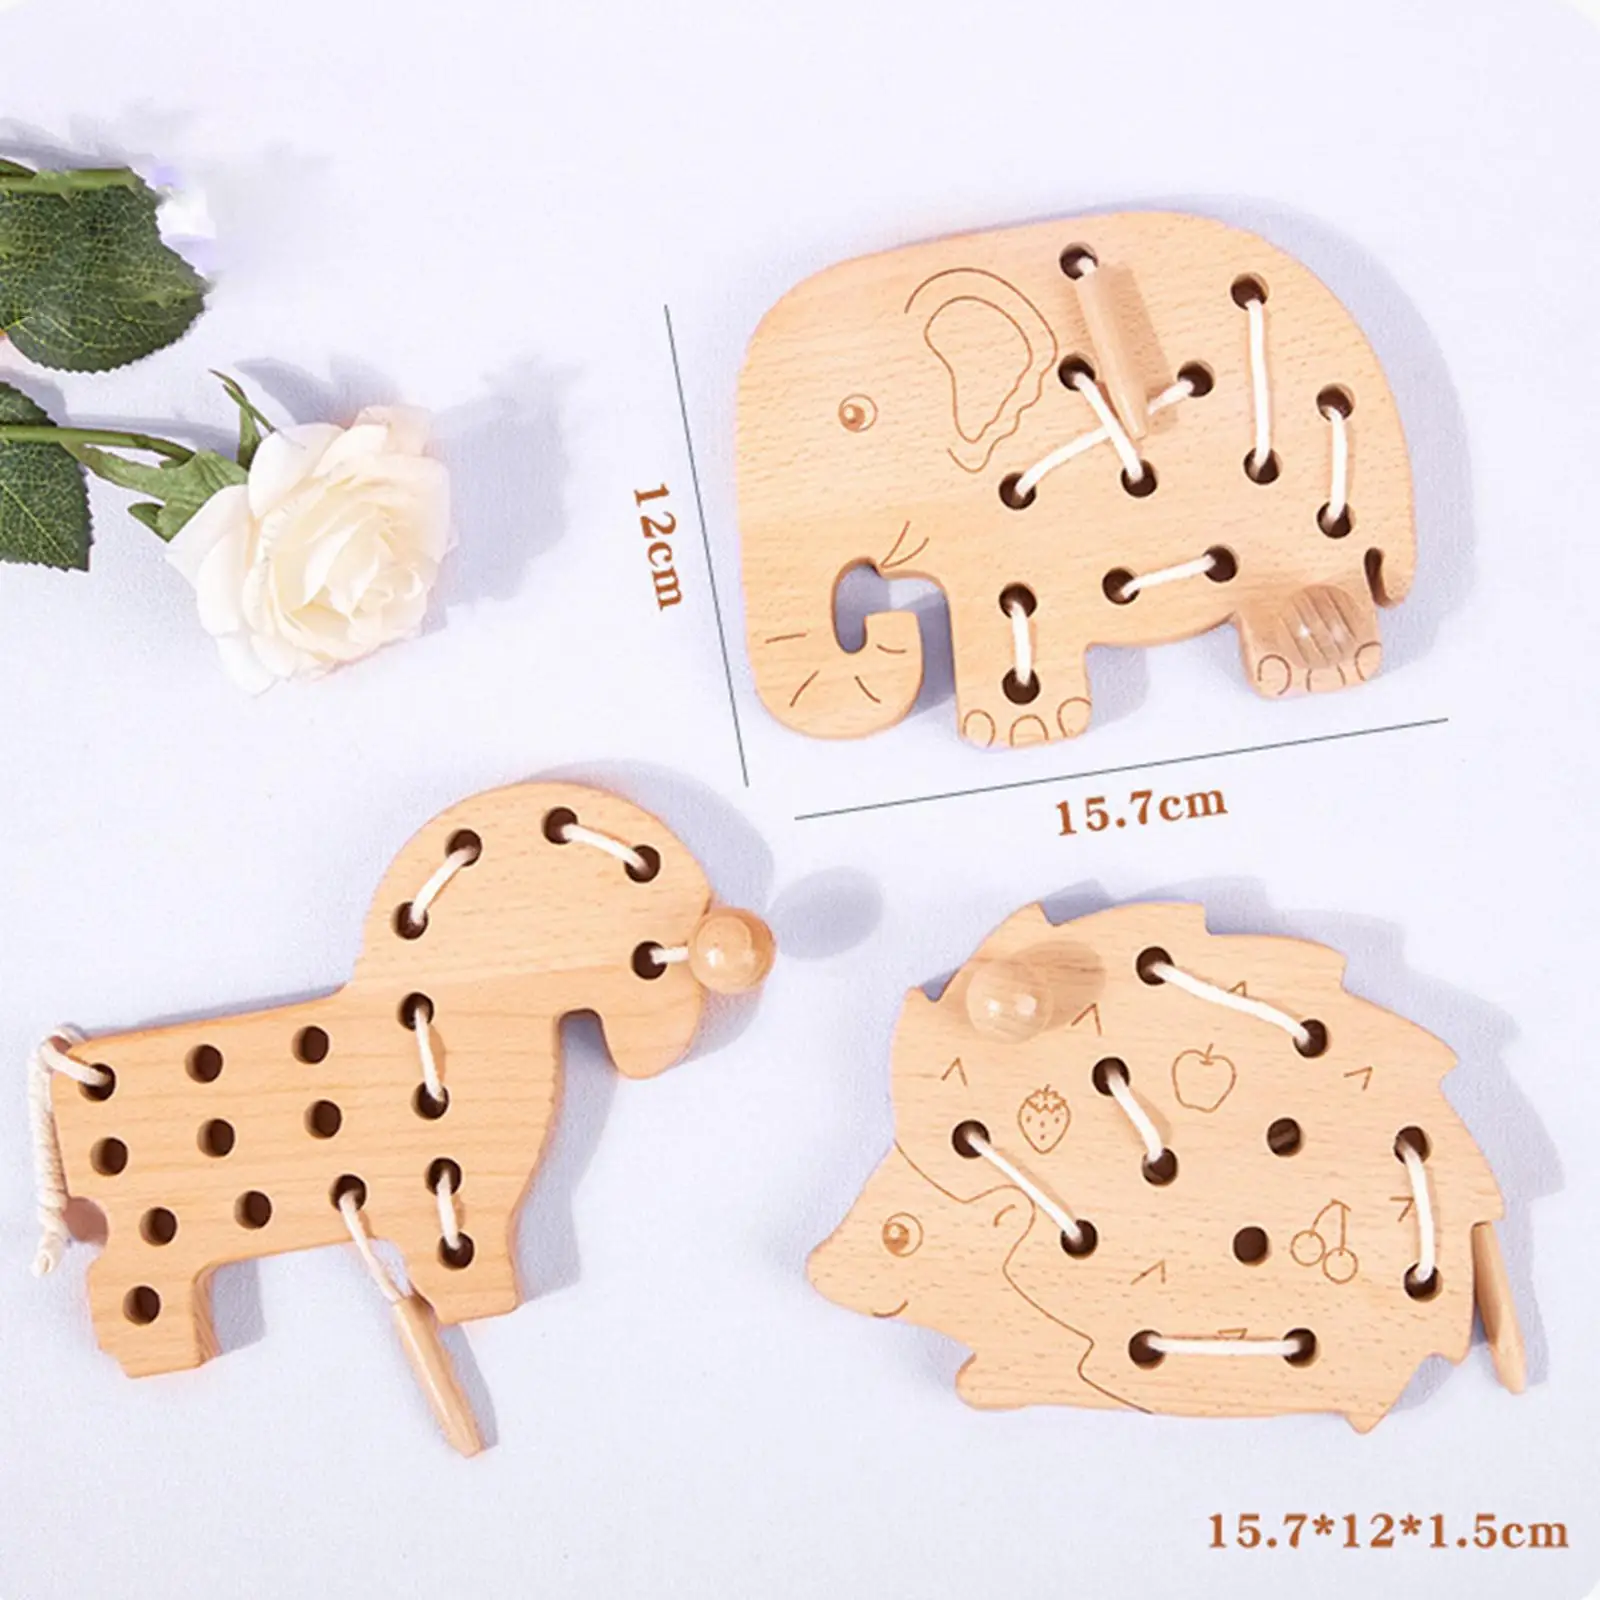 3 Pieces Wooden Lacing Threading Toys Travel Montessori Toys Kindergarten Wood Lace Block Puzzle for Airplane Boys Toddlers